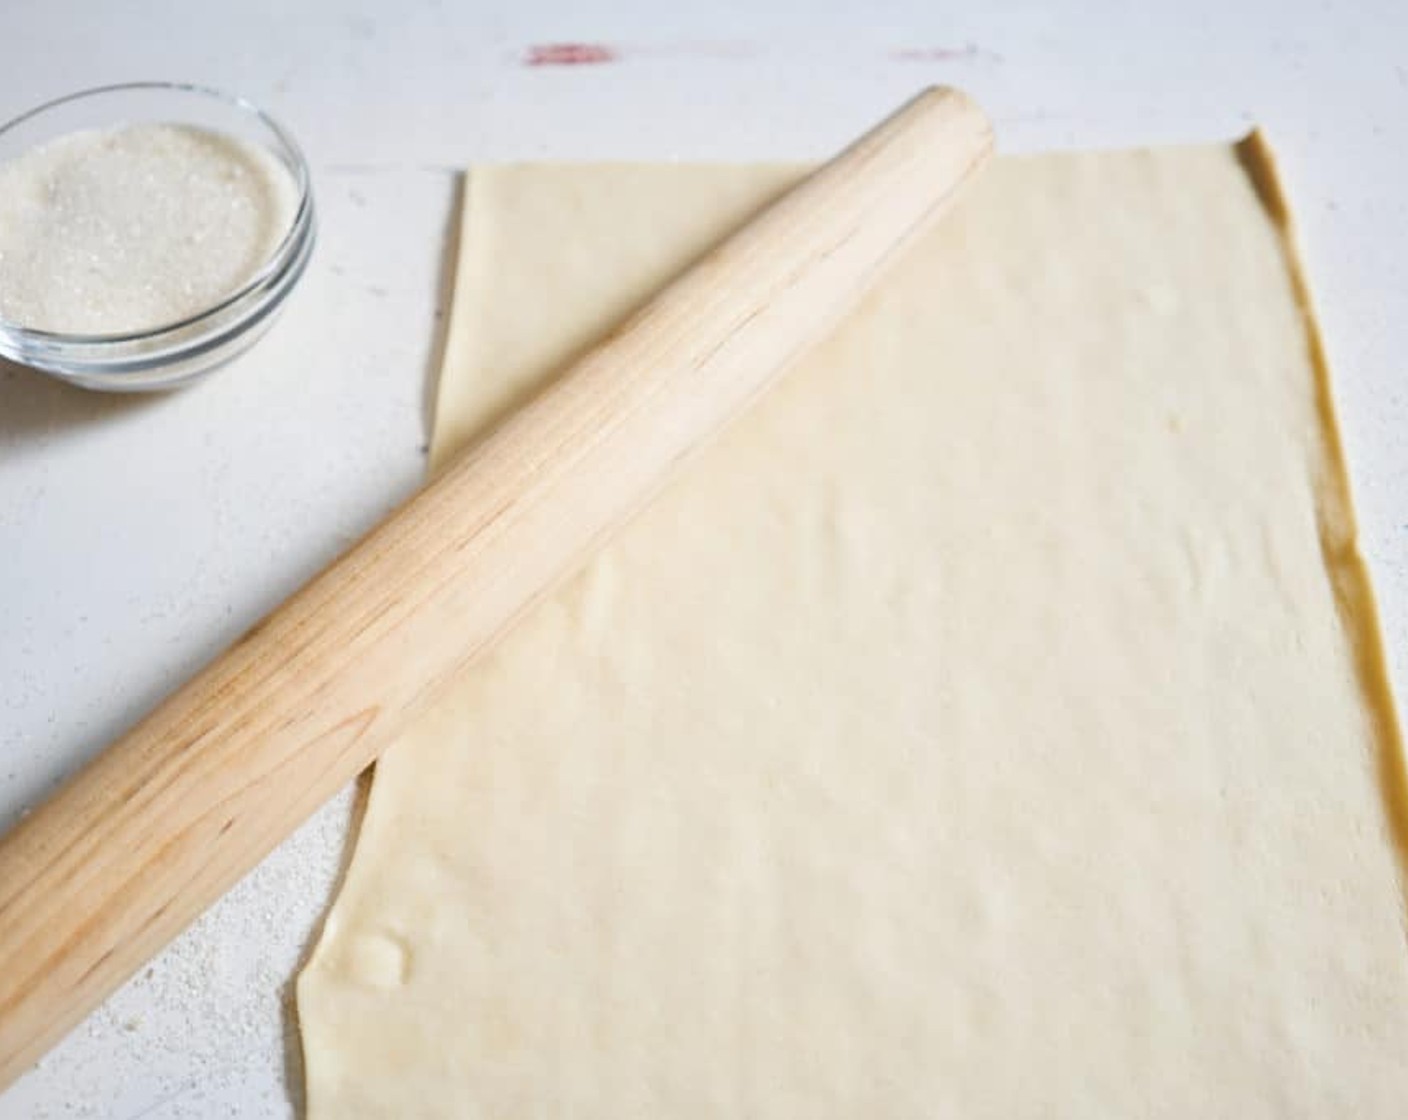 step 1 Sprinkle a cool, flat surface with Granulated Sugar (1 cup). Gently open up the sheet of Puff Pastry (2 sheets) and lay flat on top of the layer of sugar. Sprinkle sugar evenly all over the sheet of puff pastry.